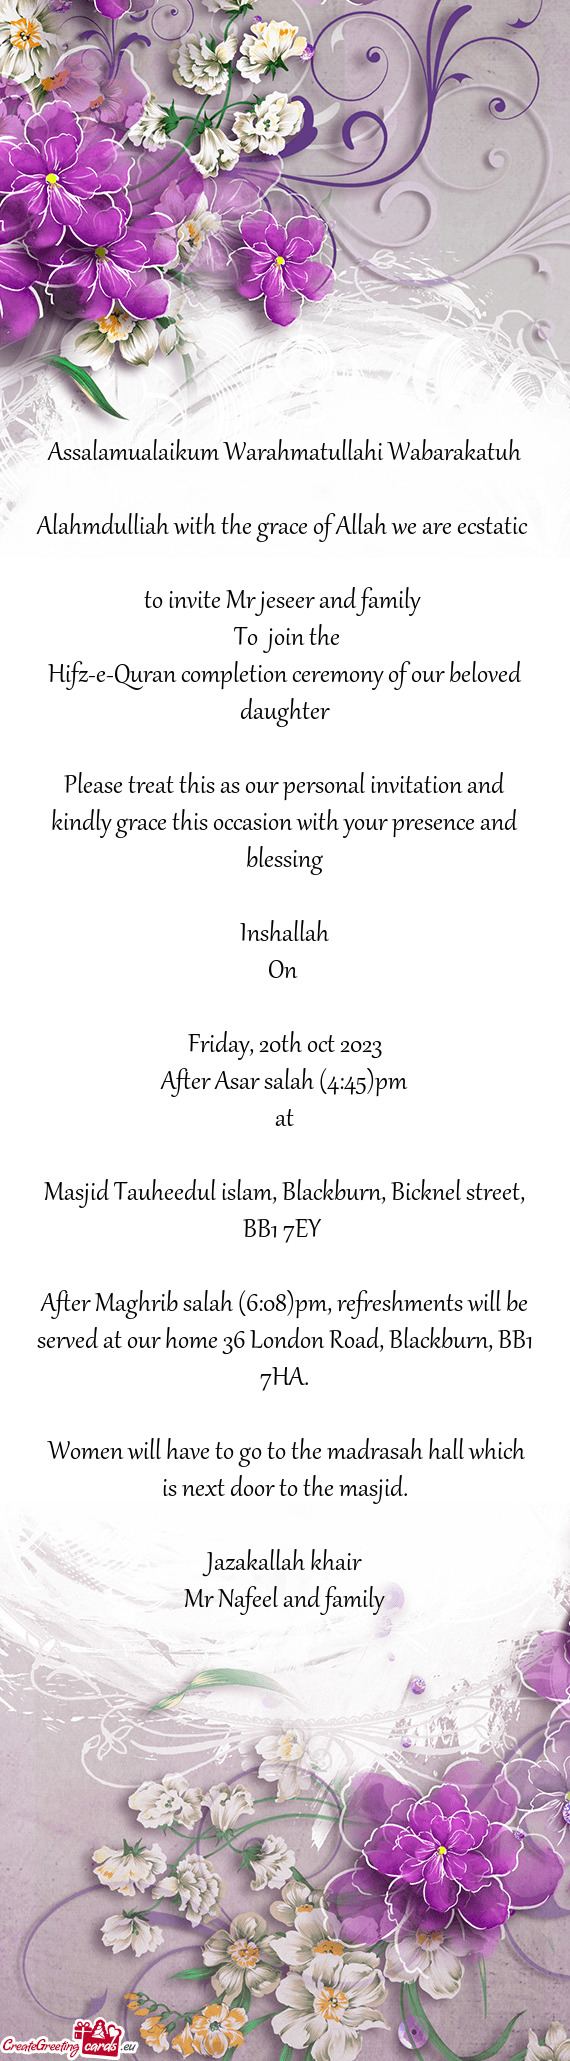 To invite Mr jeseer and family